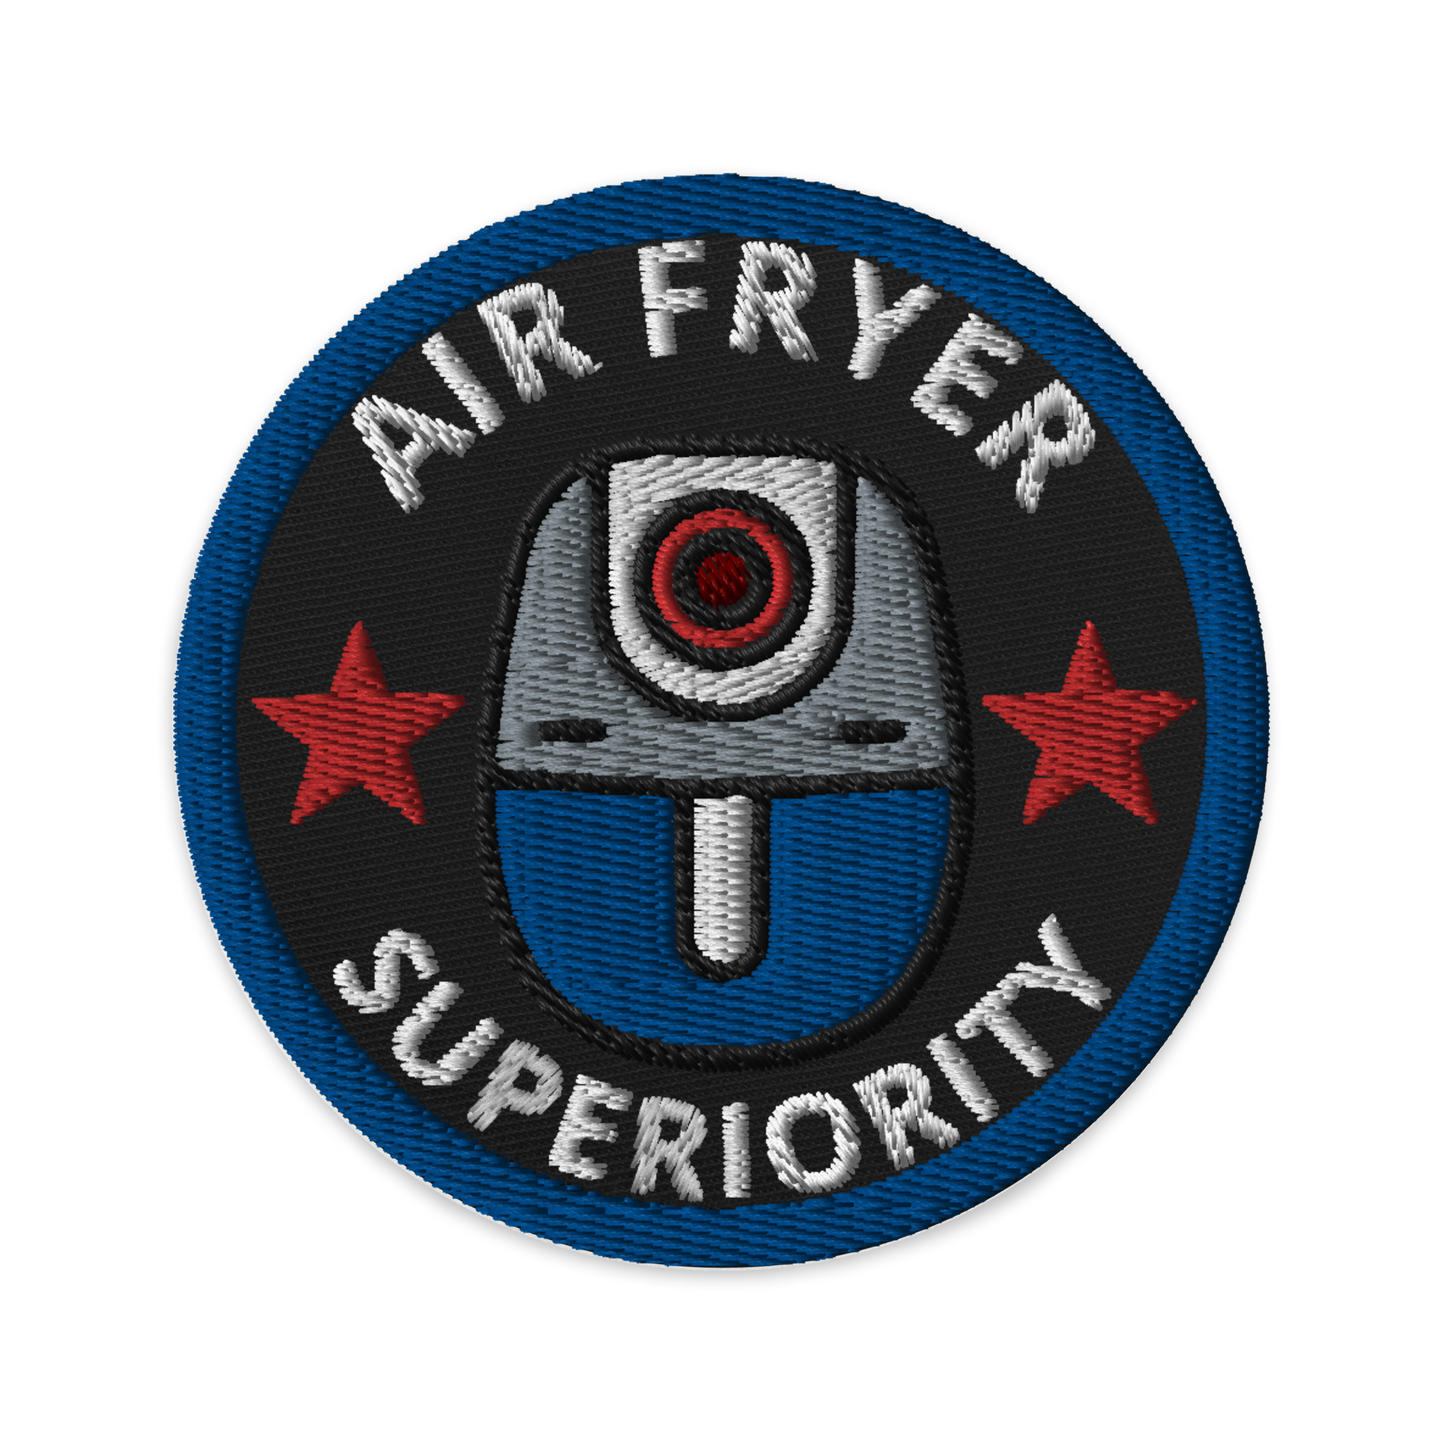 Identity Patches: Air (Fryer) Superiority